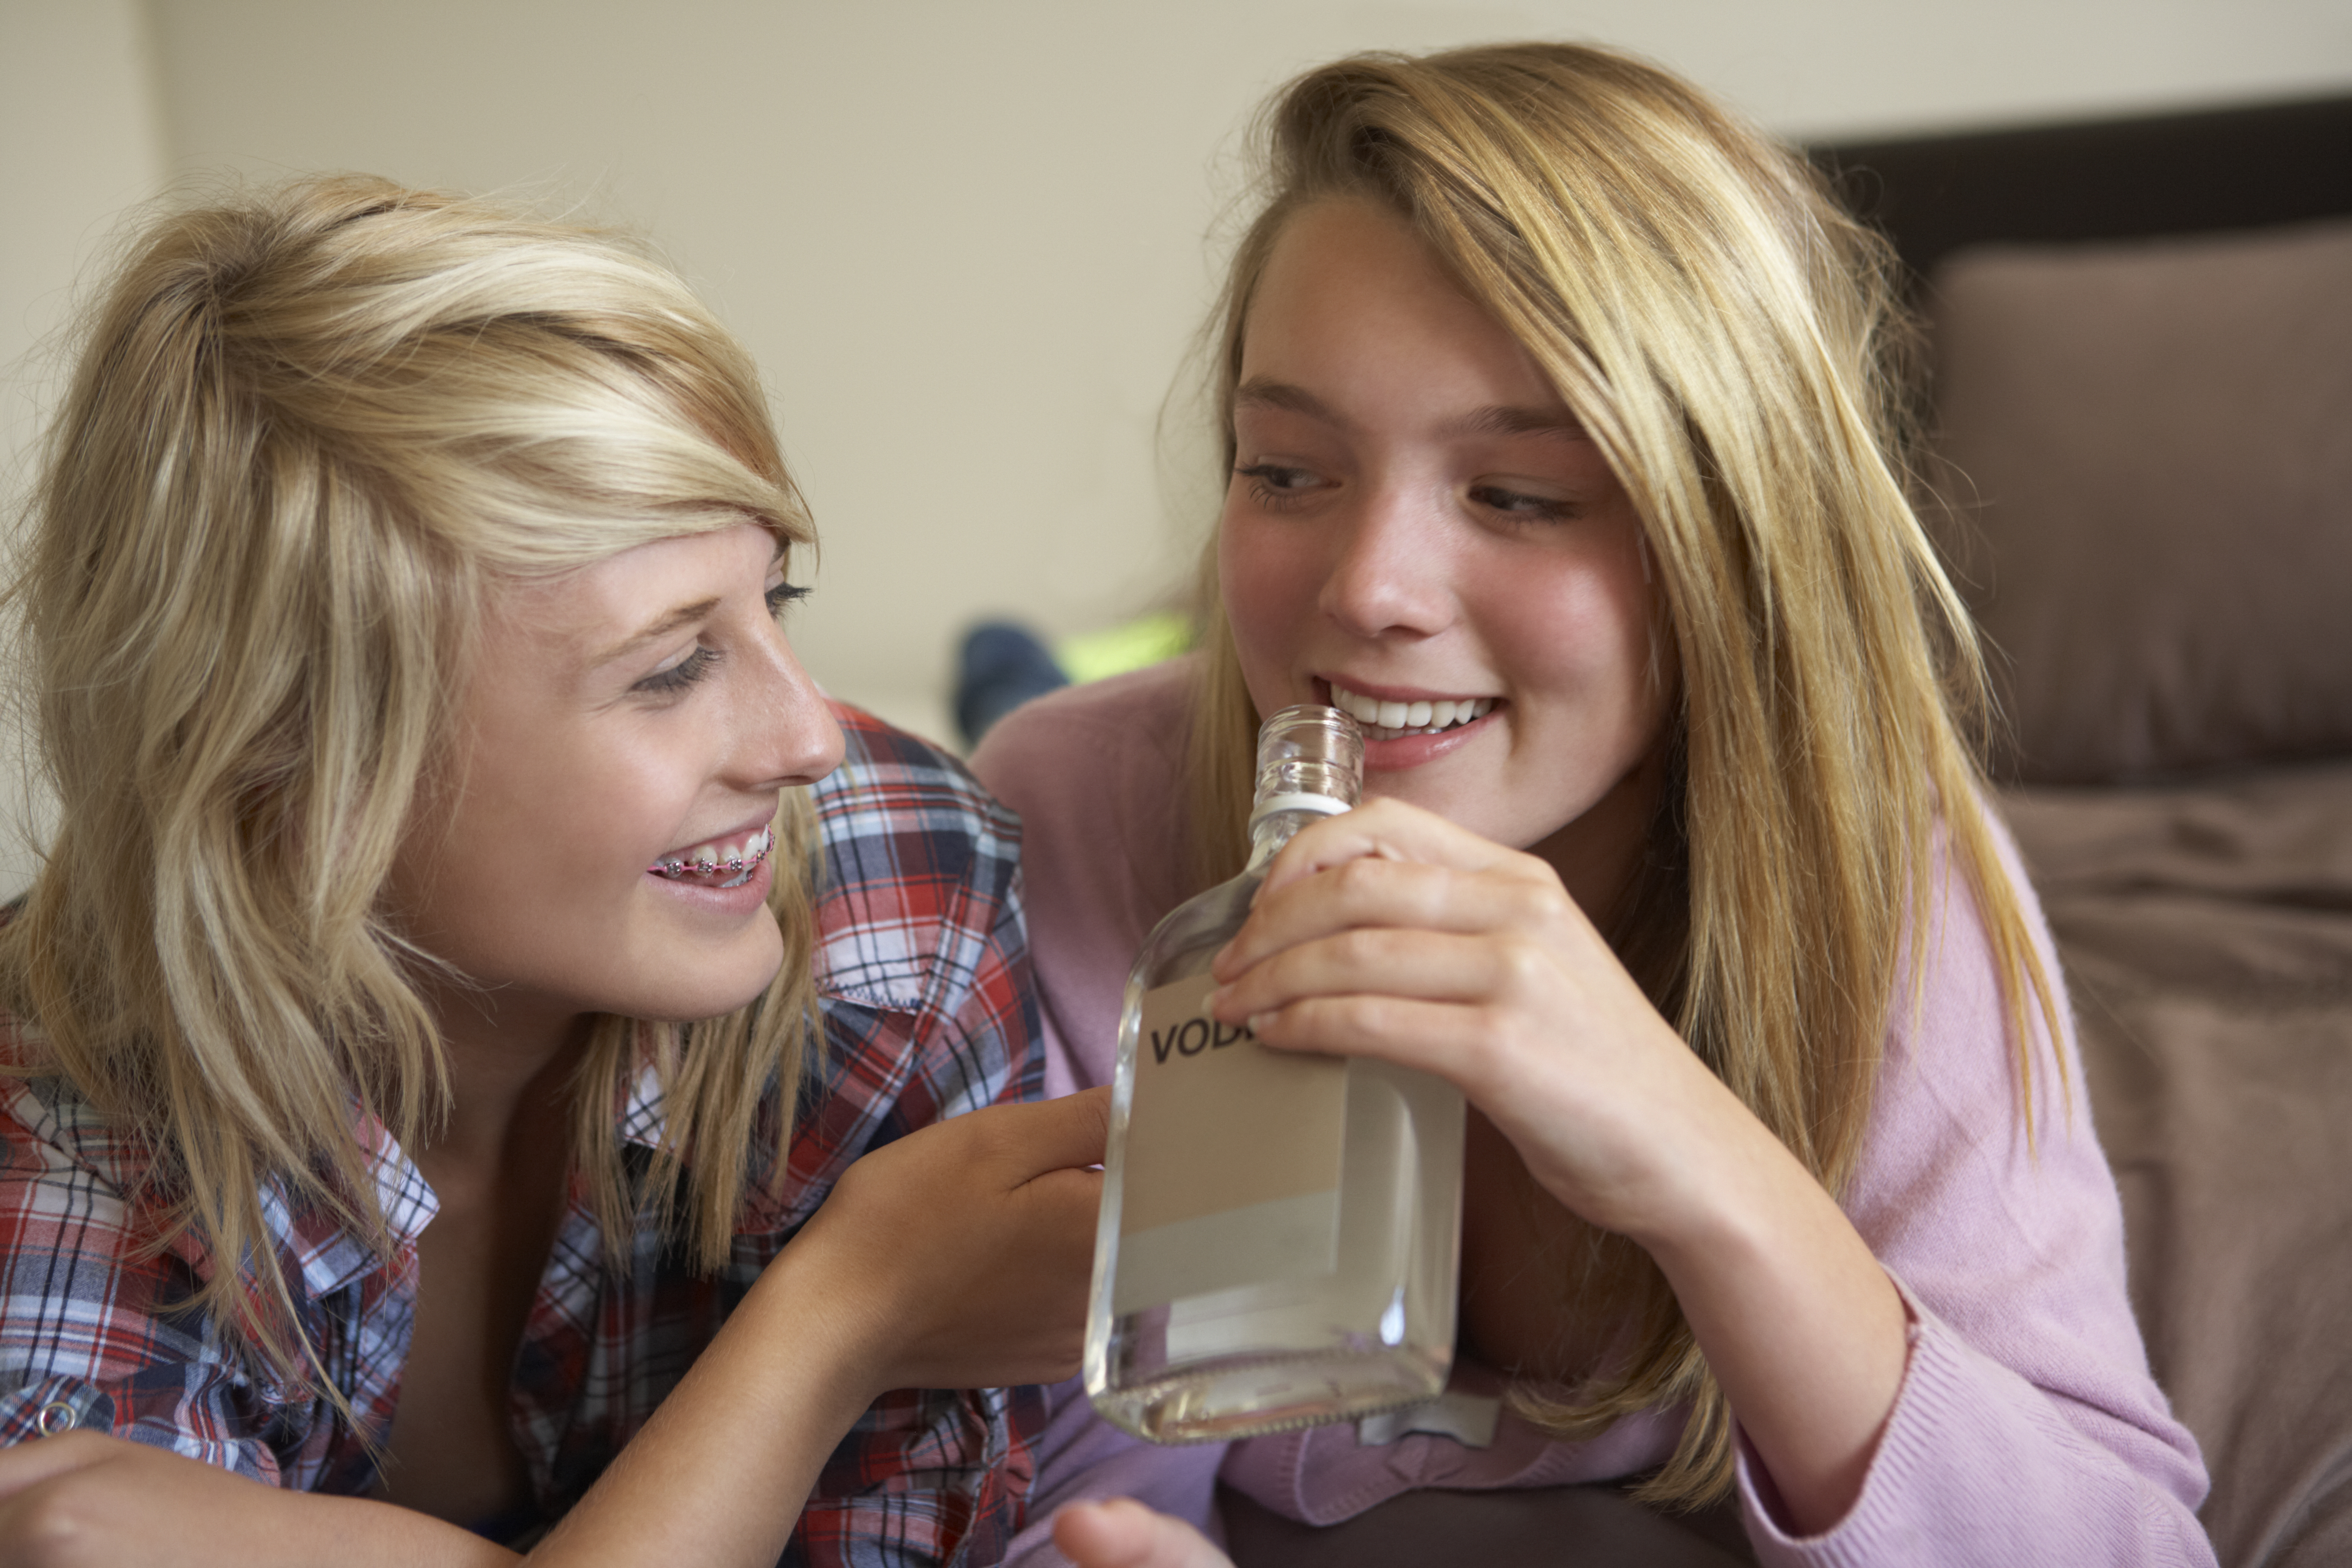 Underage Drinking and Alcohol use: Signs to look for